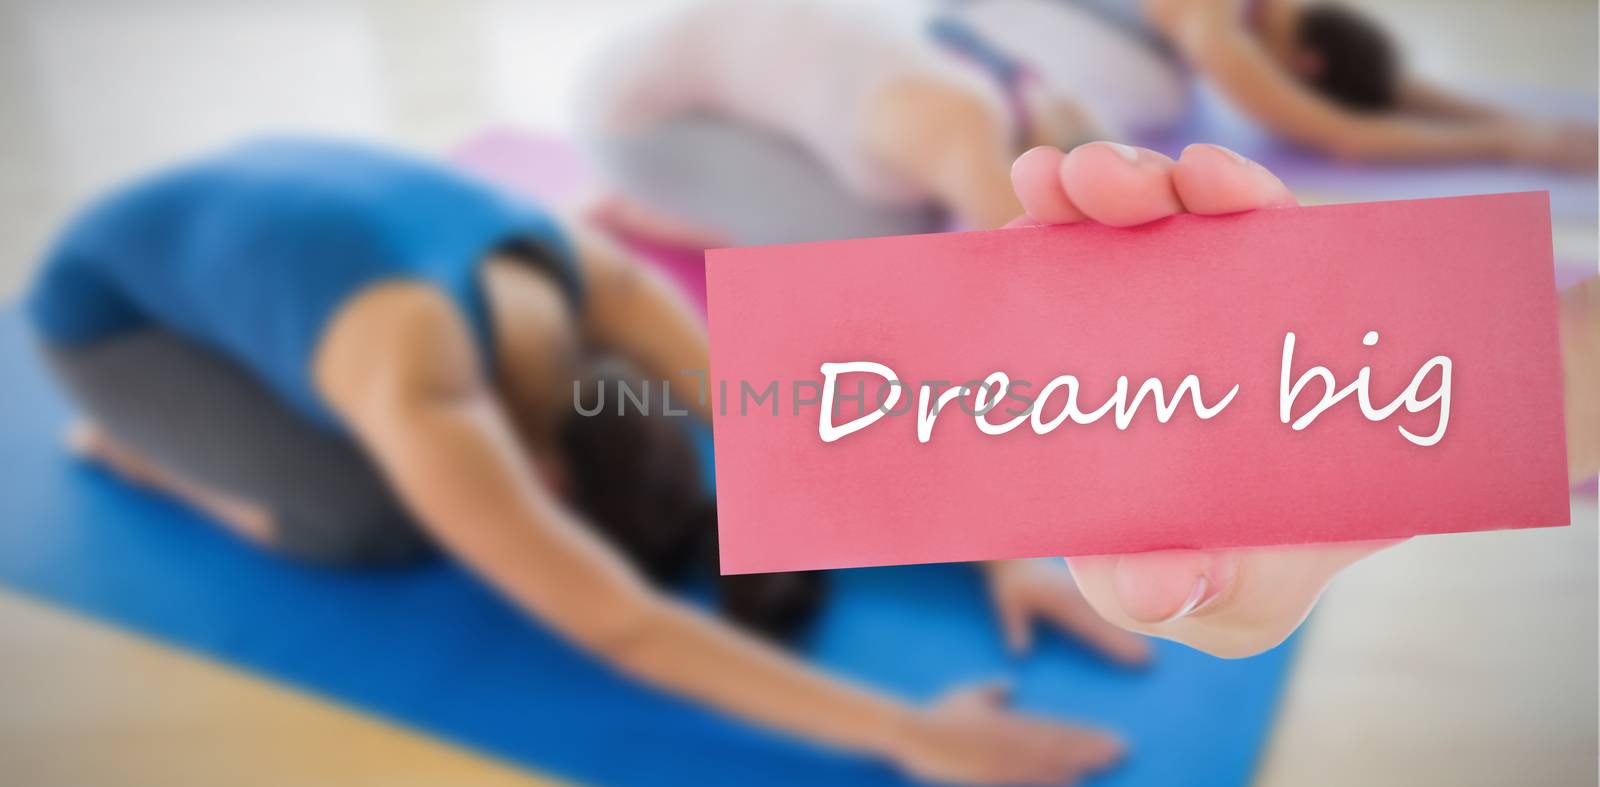 The word dream big and hand showing card against 